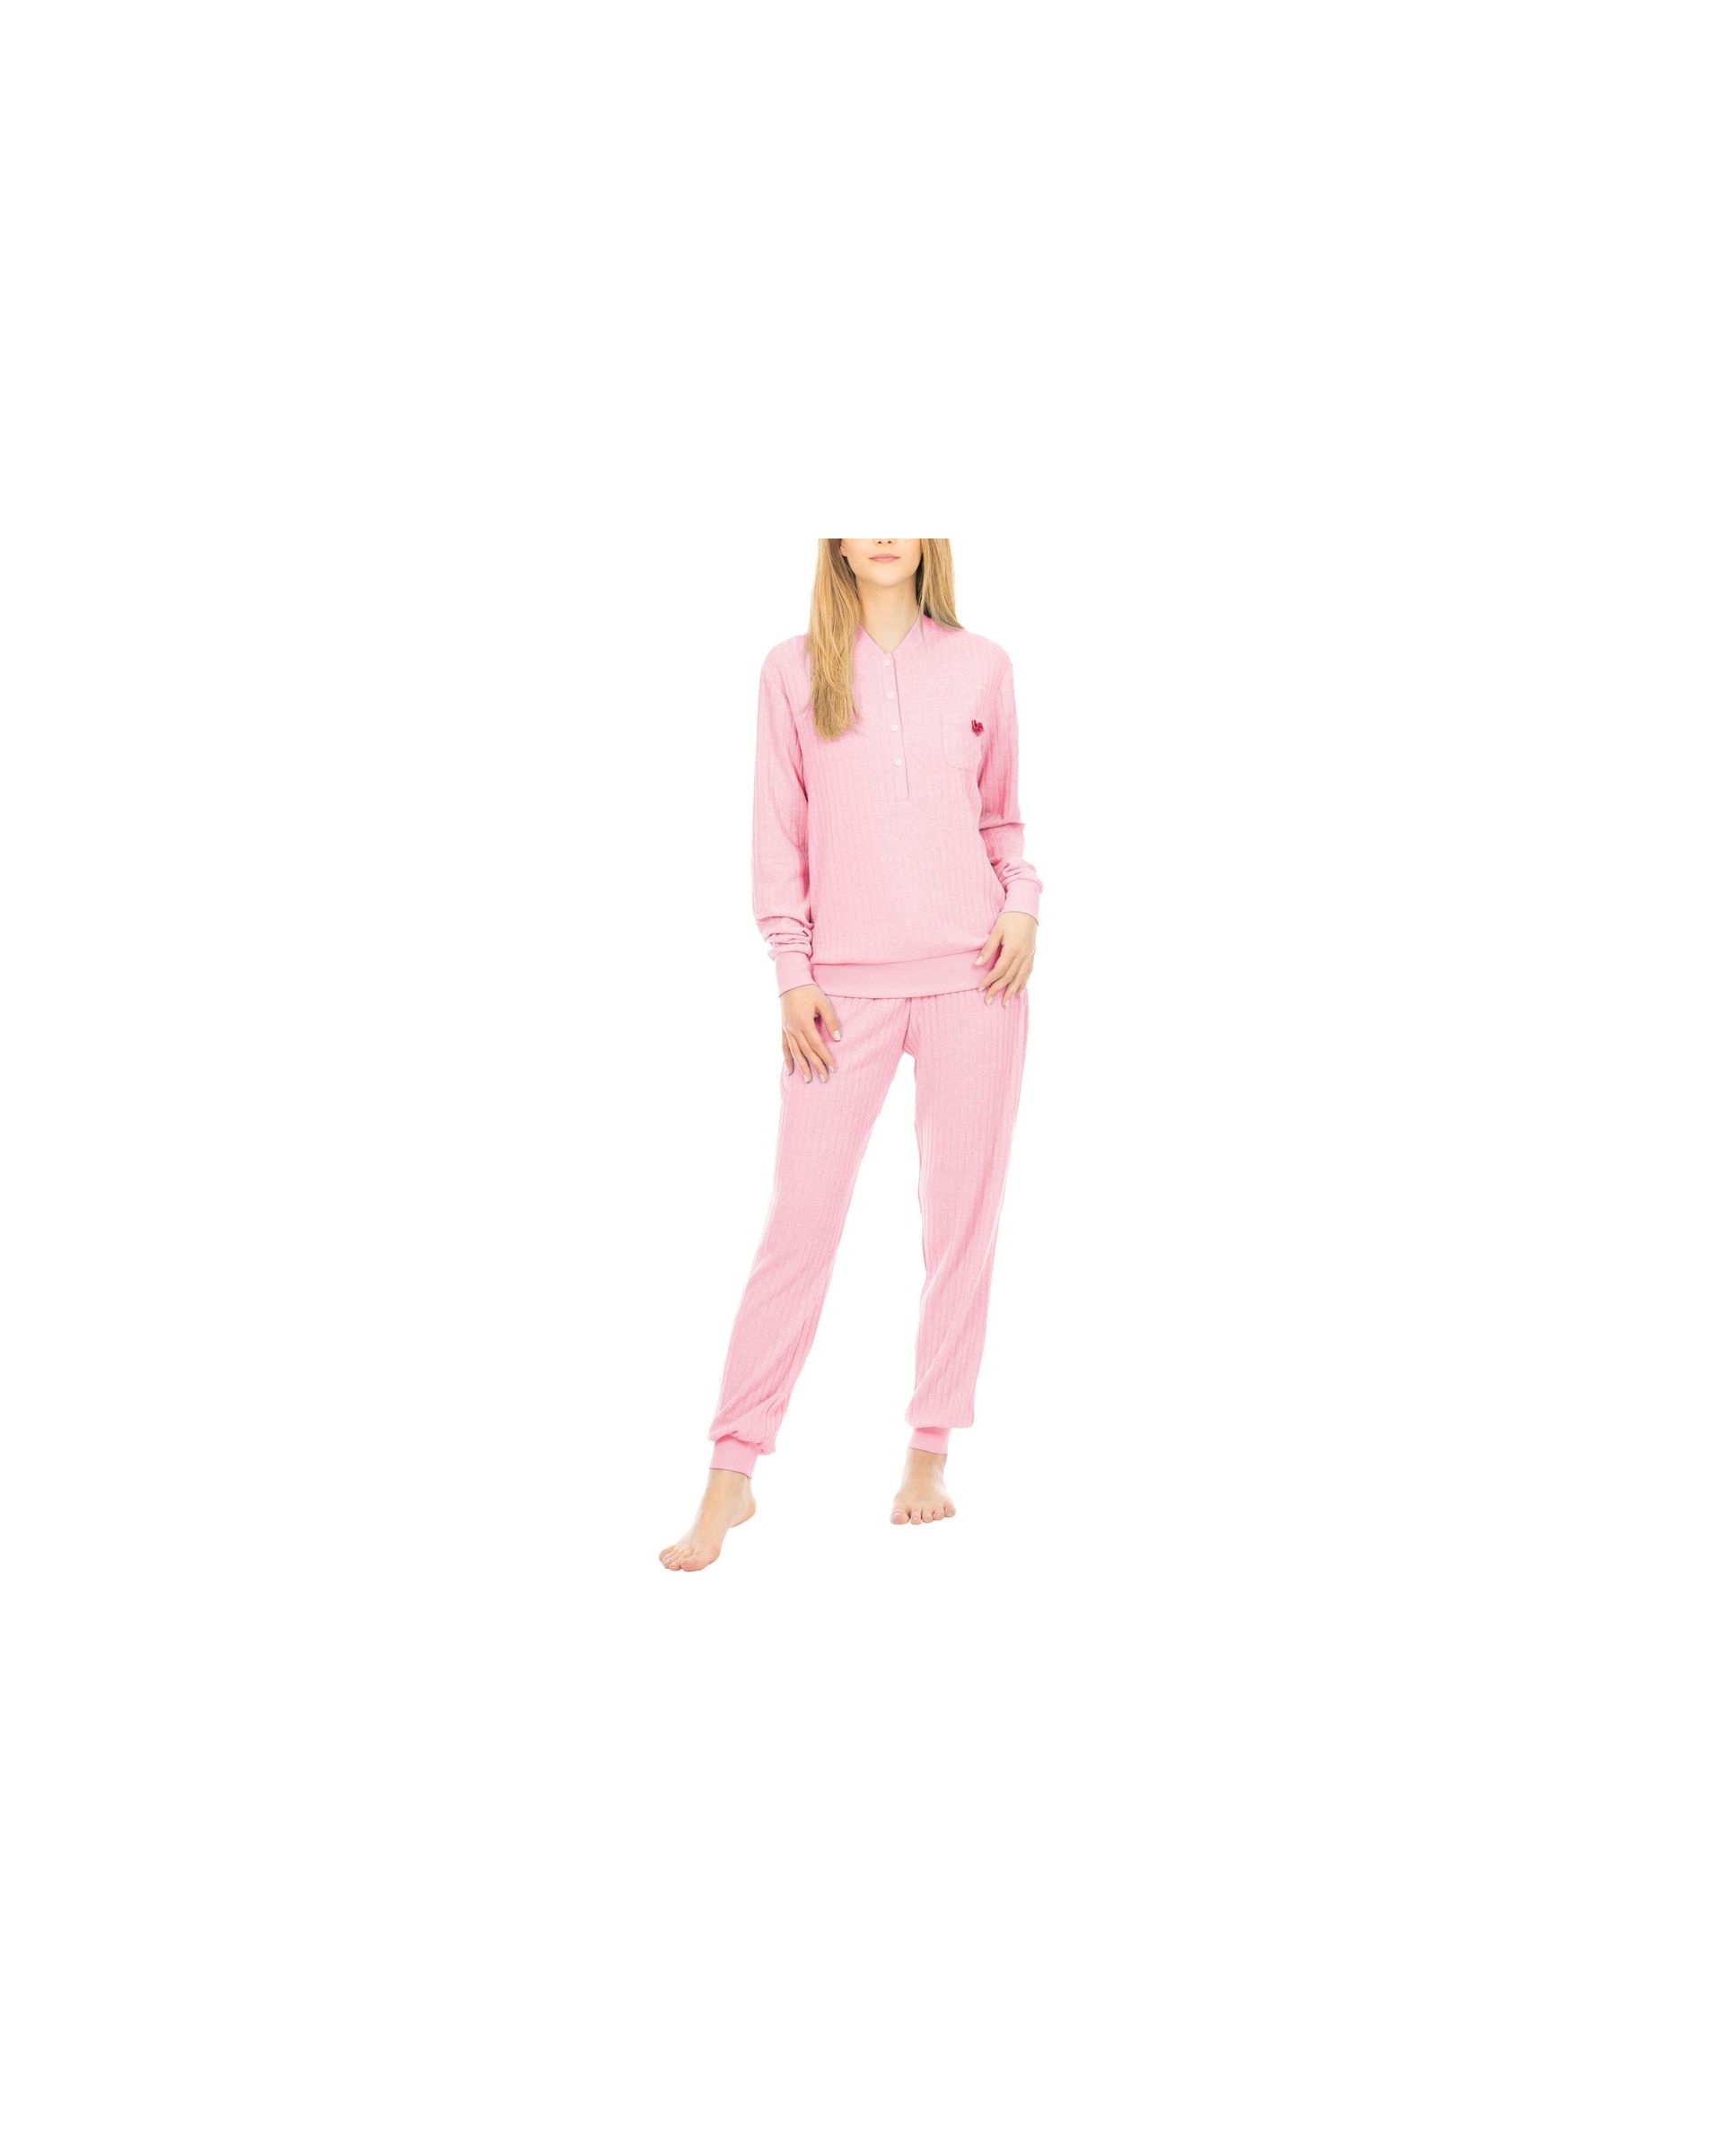 Women's long canale pyjamas with buttons